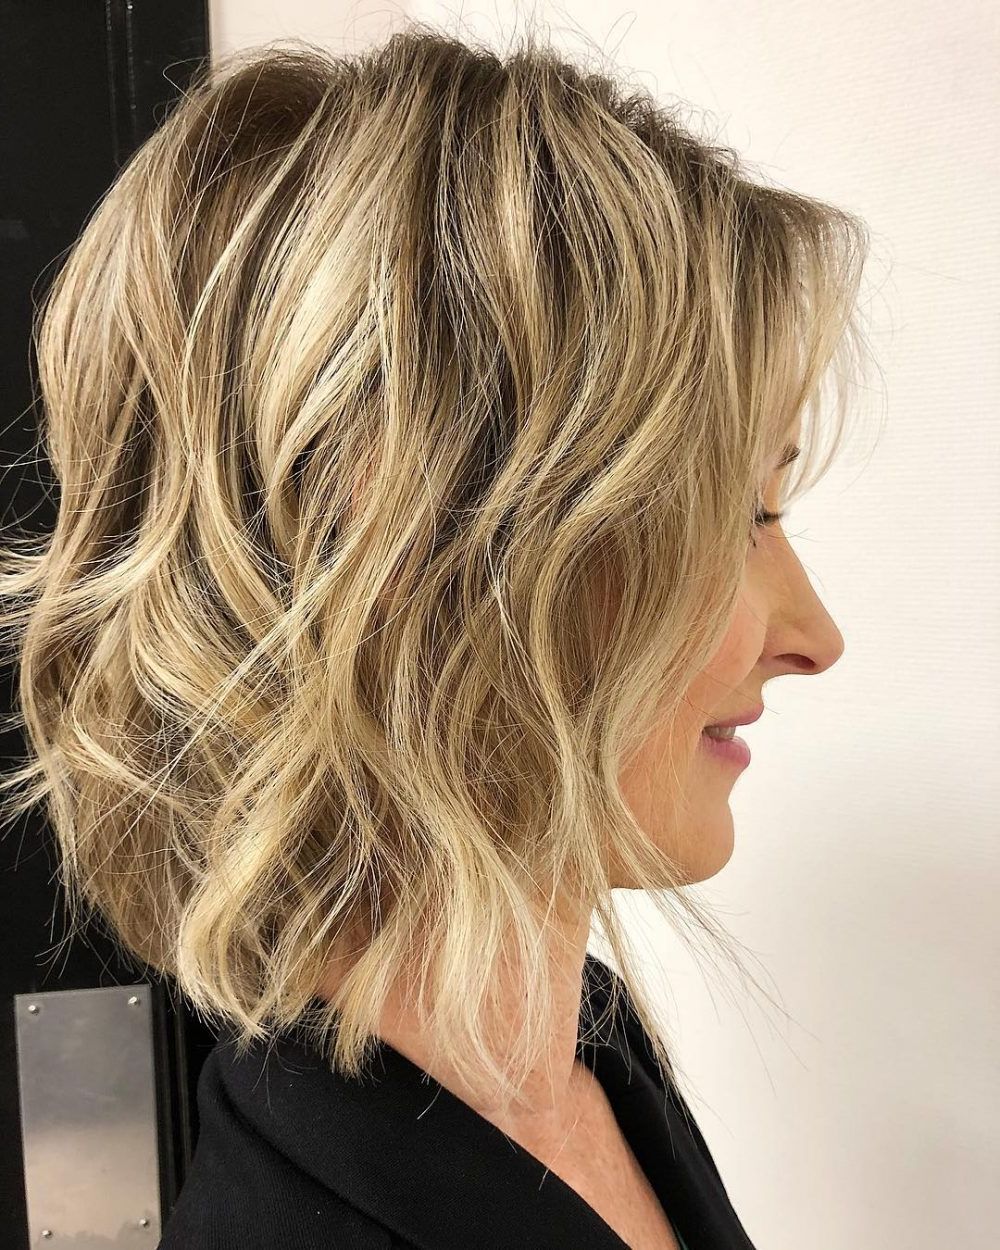 43 Perfect Short Hairstyles For Fine Hair In 2019 Within Best And Newest Trendy Medium Hairstyles For Thin Hair (View 10 of 20)